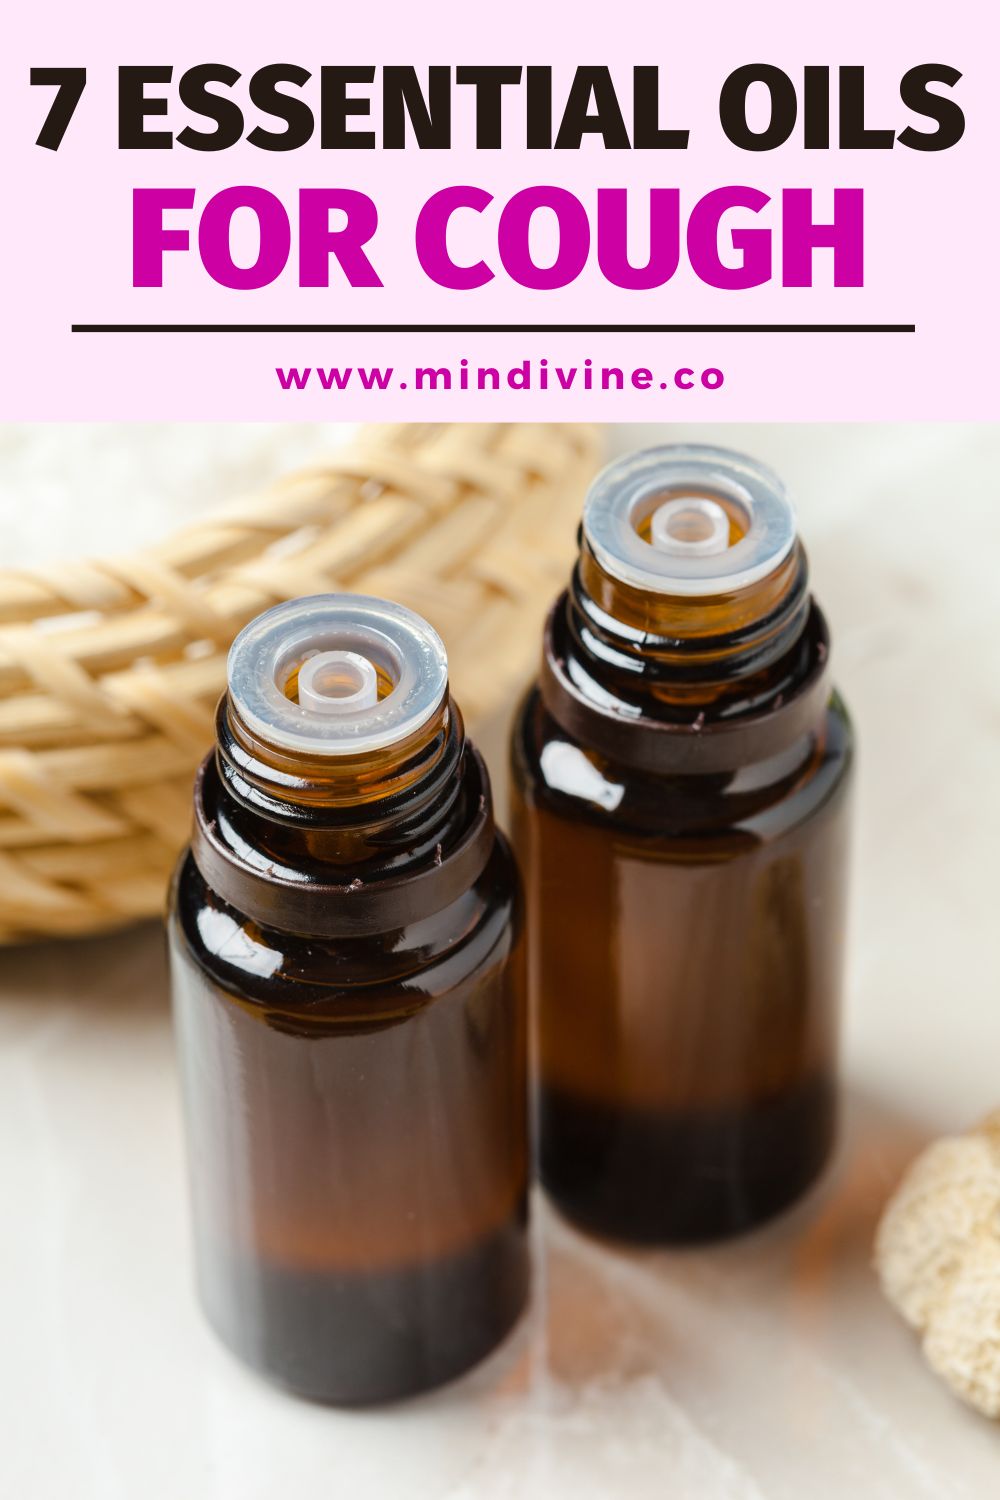 Top essential oils for cough.